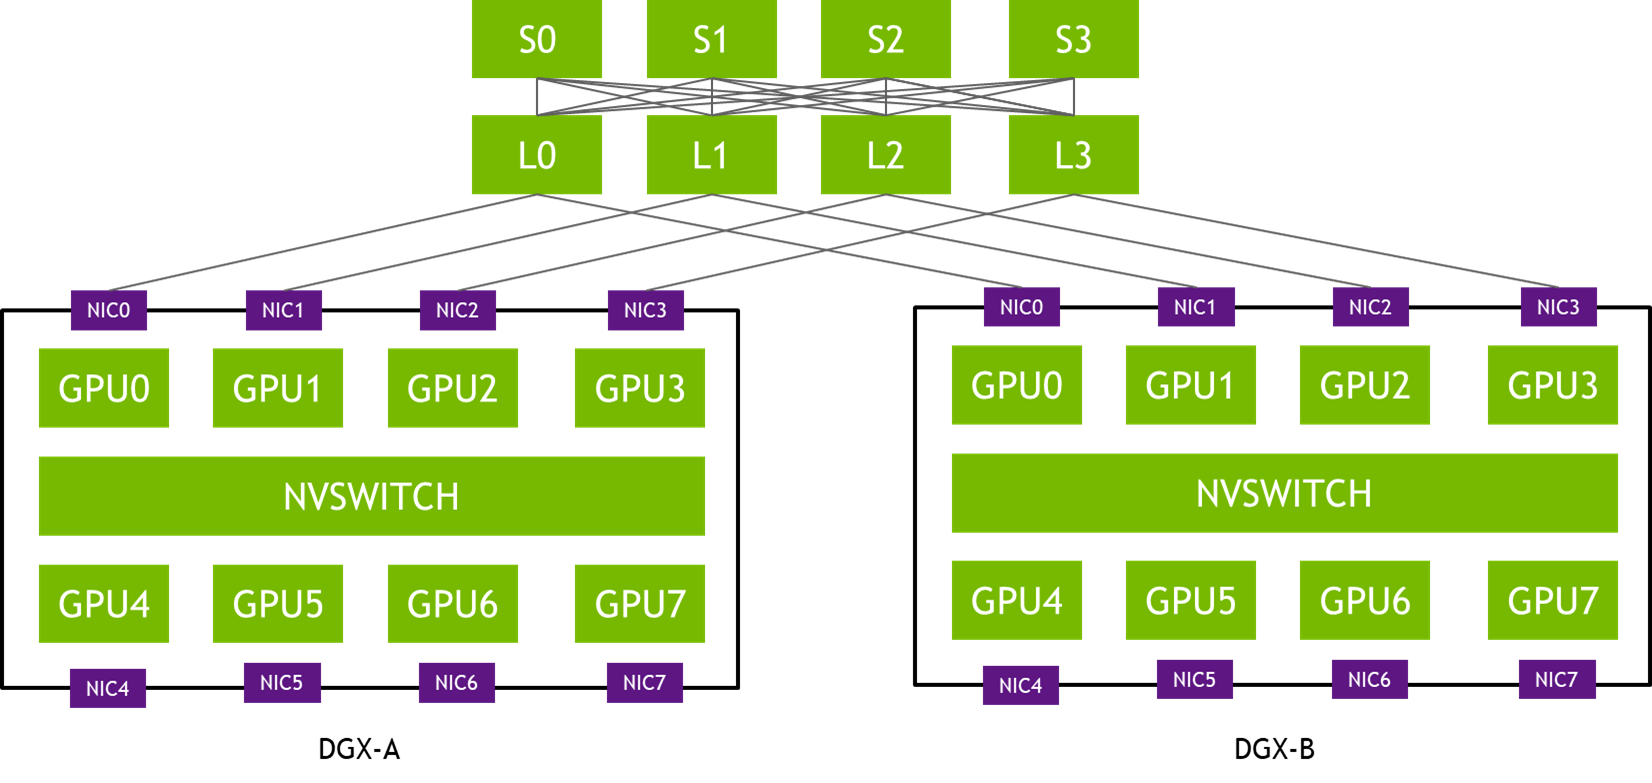 Topology that shows NIC0s of all DGXs connected to the same switch, NIC1s to another leaf switch and so on.